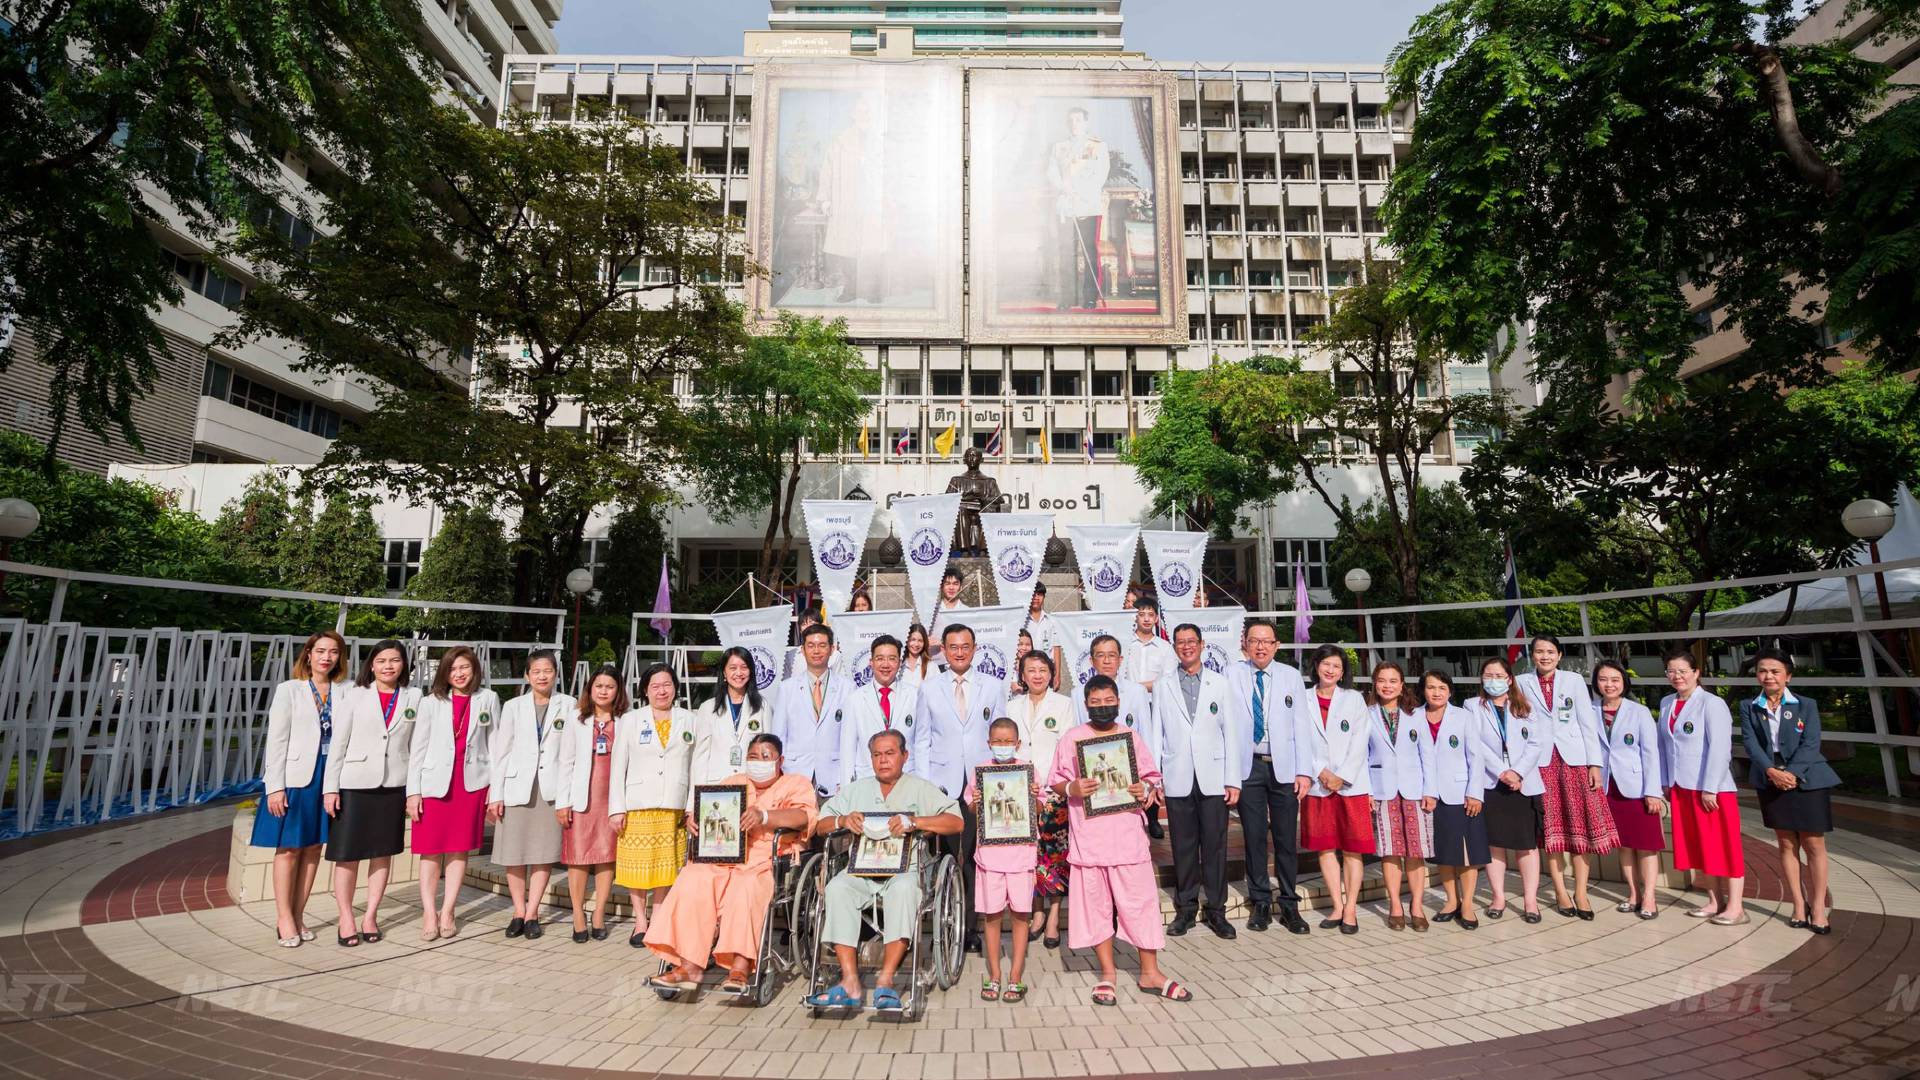 Mahidol Students Participated in the Ceremony of Taking the Oath and the “Mahidol Day” Donation Event